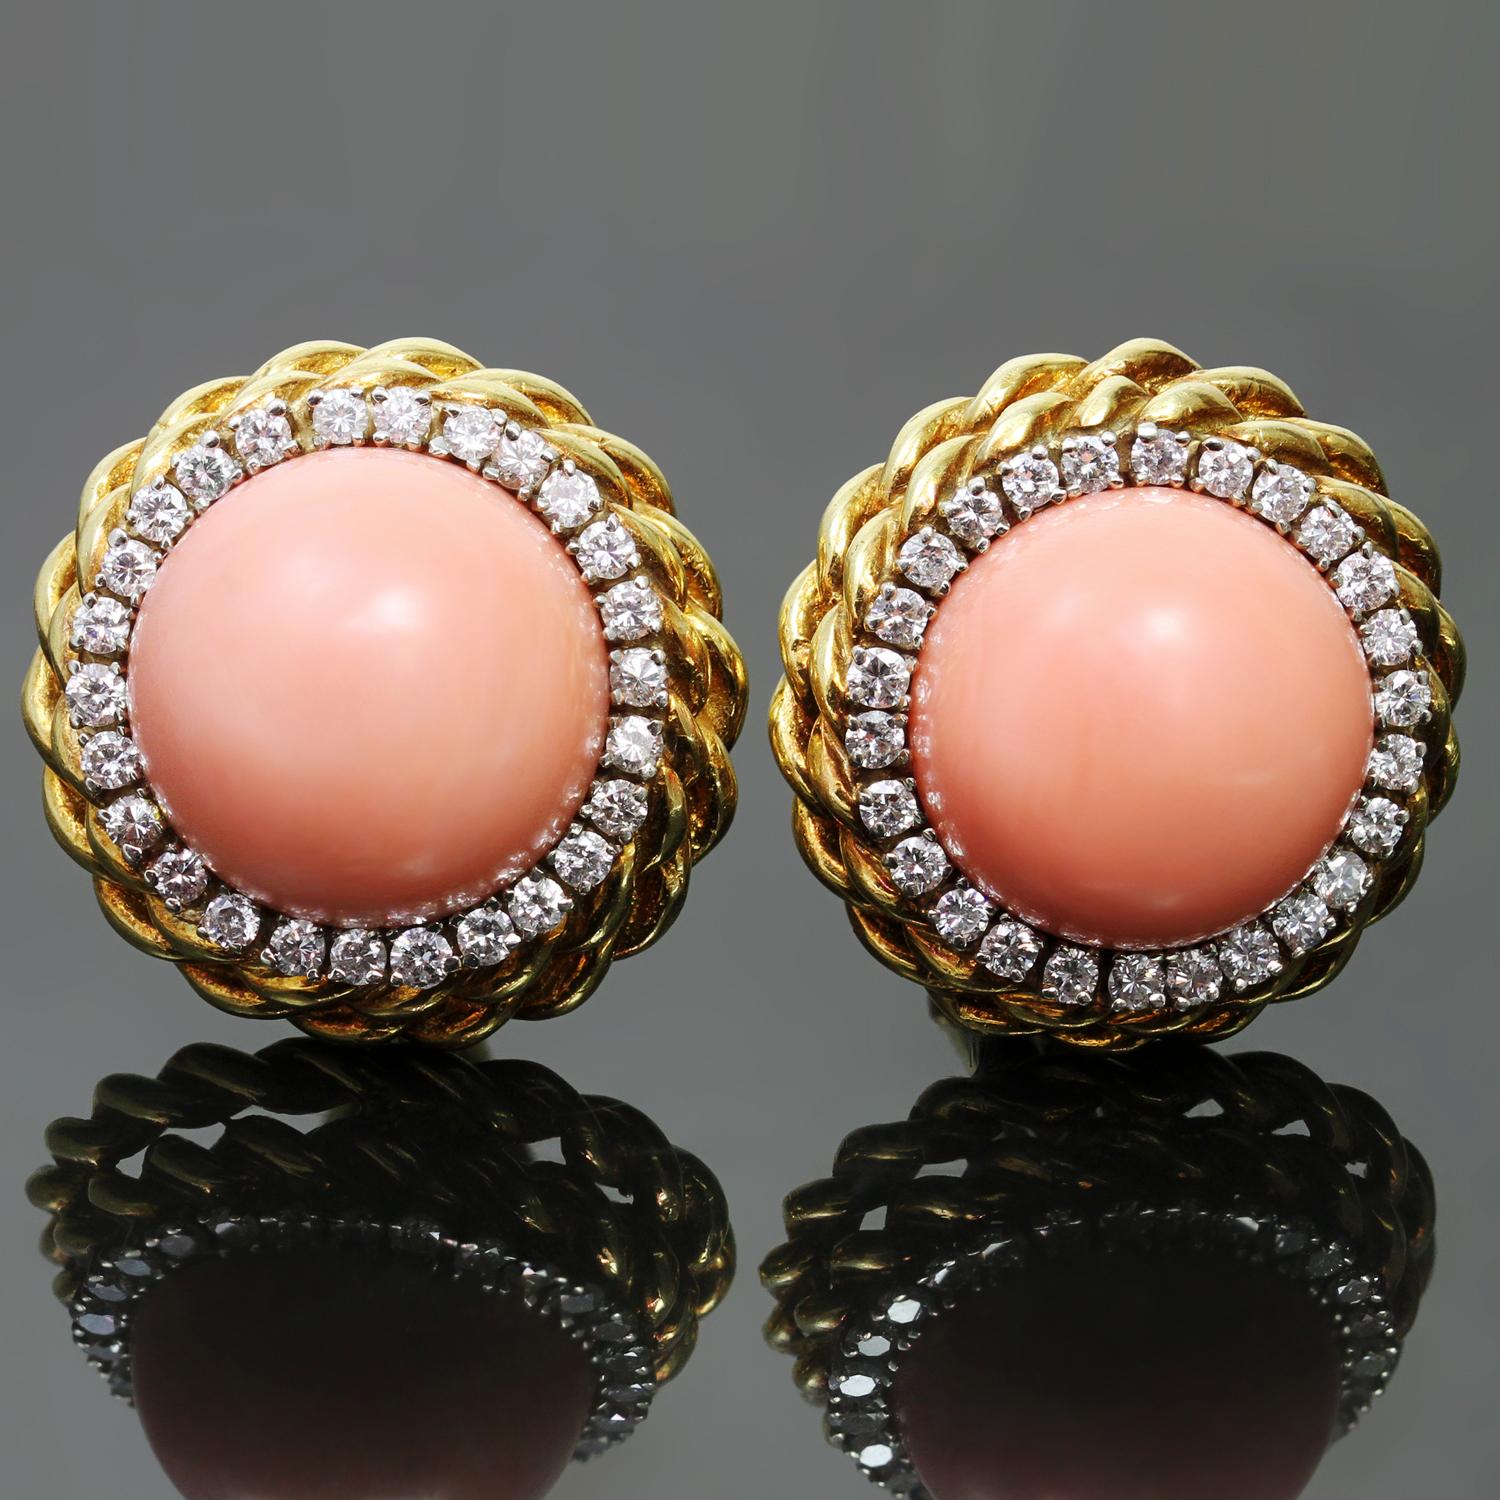 These gorgeous vintage Van Cleef & Arpels 18k yellow gold clip-on earrings feature round cabochon corals measuring 8.70mm x 15.00mm x 15.30mm, surrounded with 52 round brilliant-cut diamonds of an estimated 1.85 carats. Made in United States circa